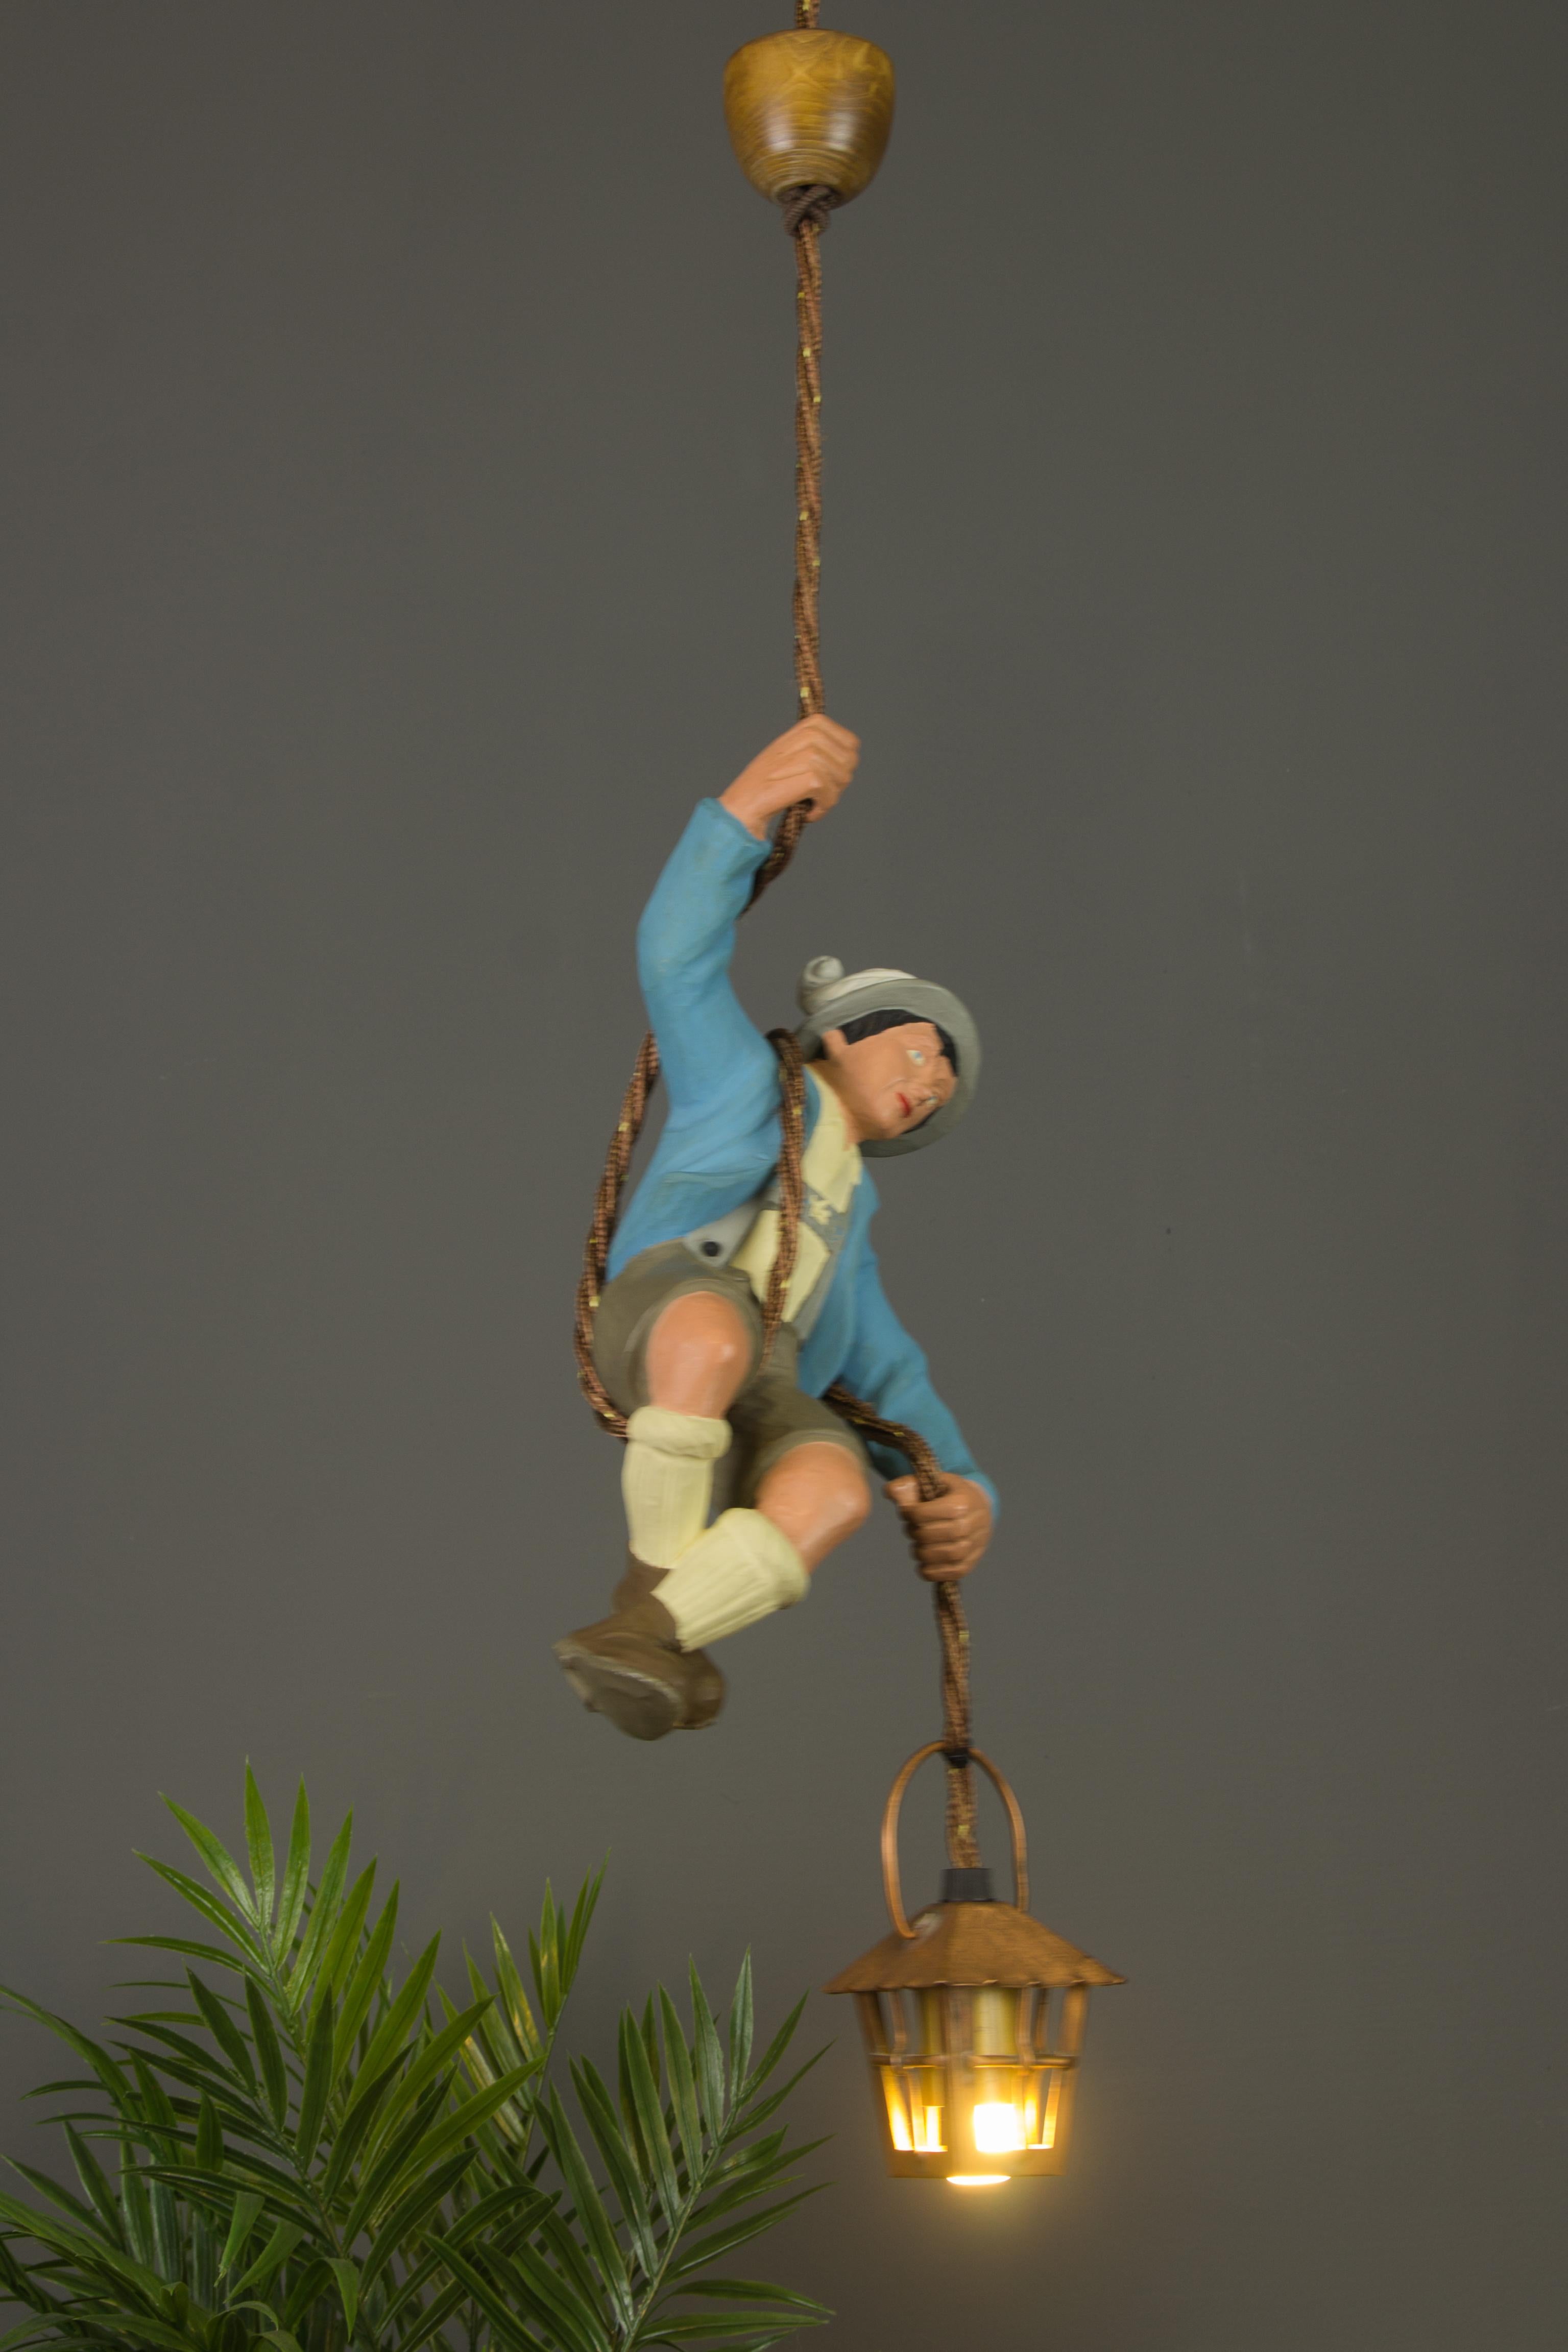 Wonderful German figural pendant lamp features a hand-carved and hand-painted figure of a Bavarian mountain climber. The detailed carved wooden man is holding onto a rope and holding a copper lantern in one hand. The figure has a blue-painted